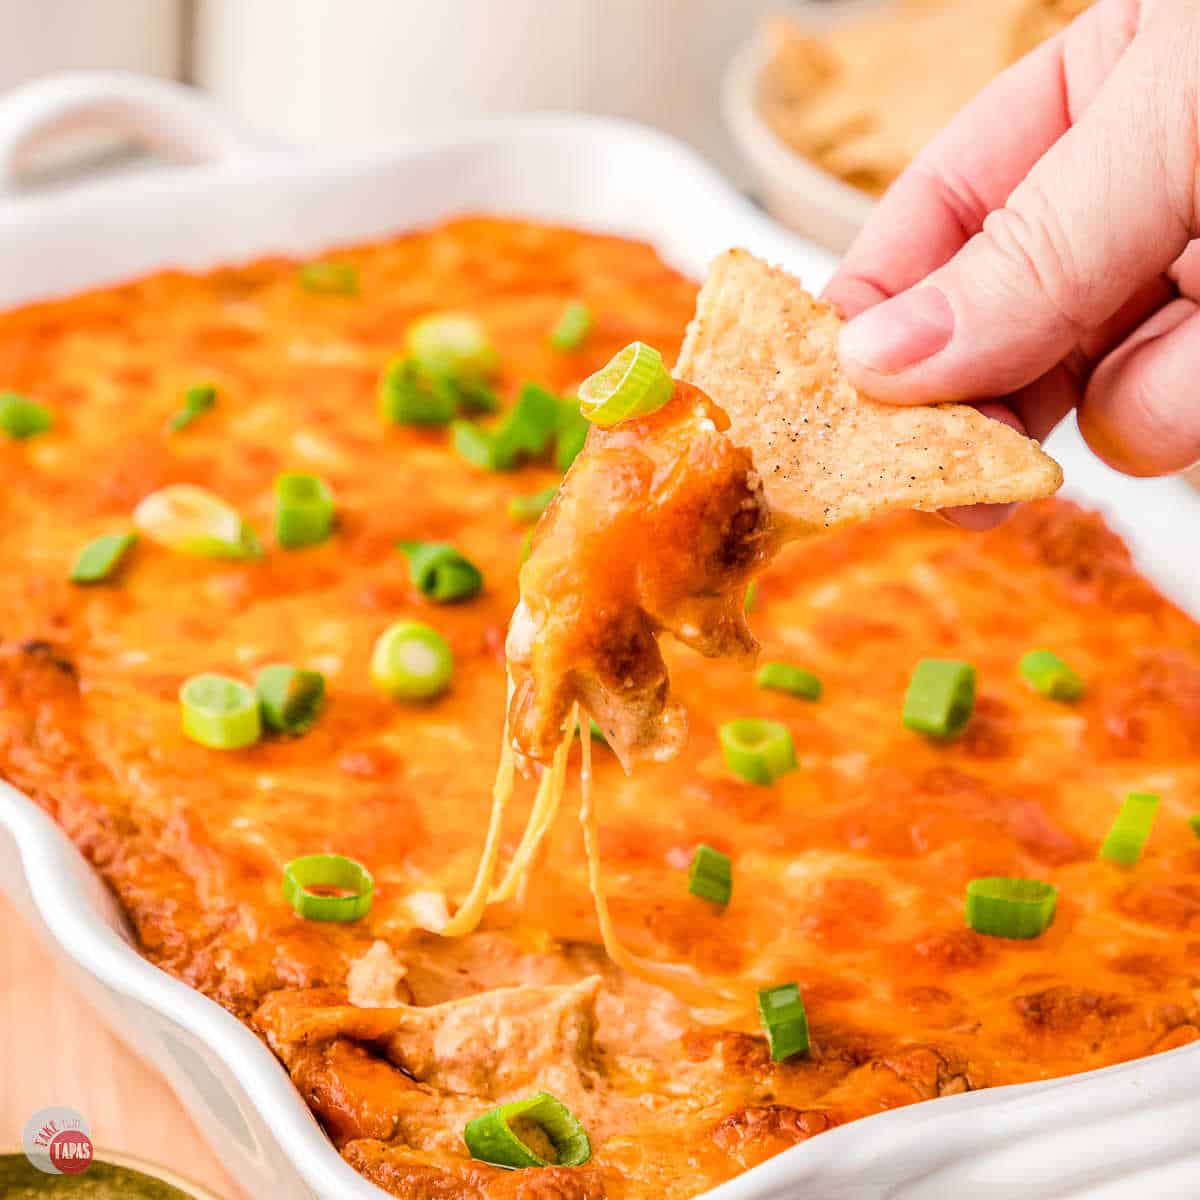 Texas Trash Dip on a chip in a hand